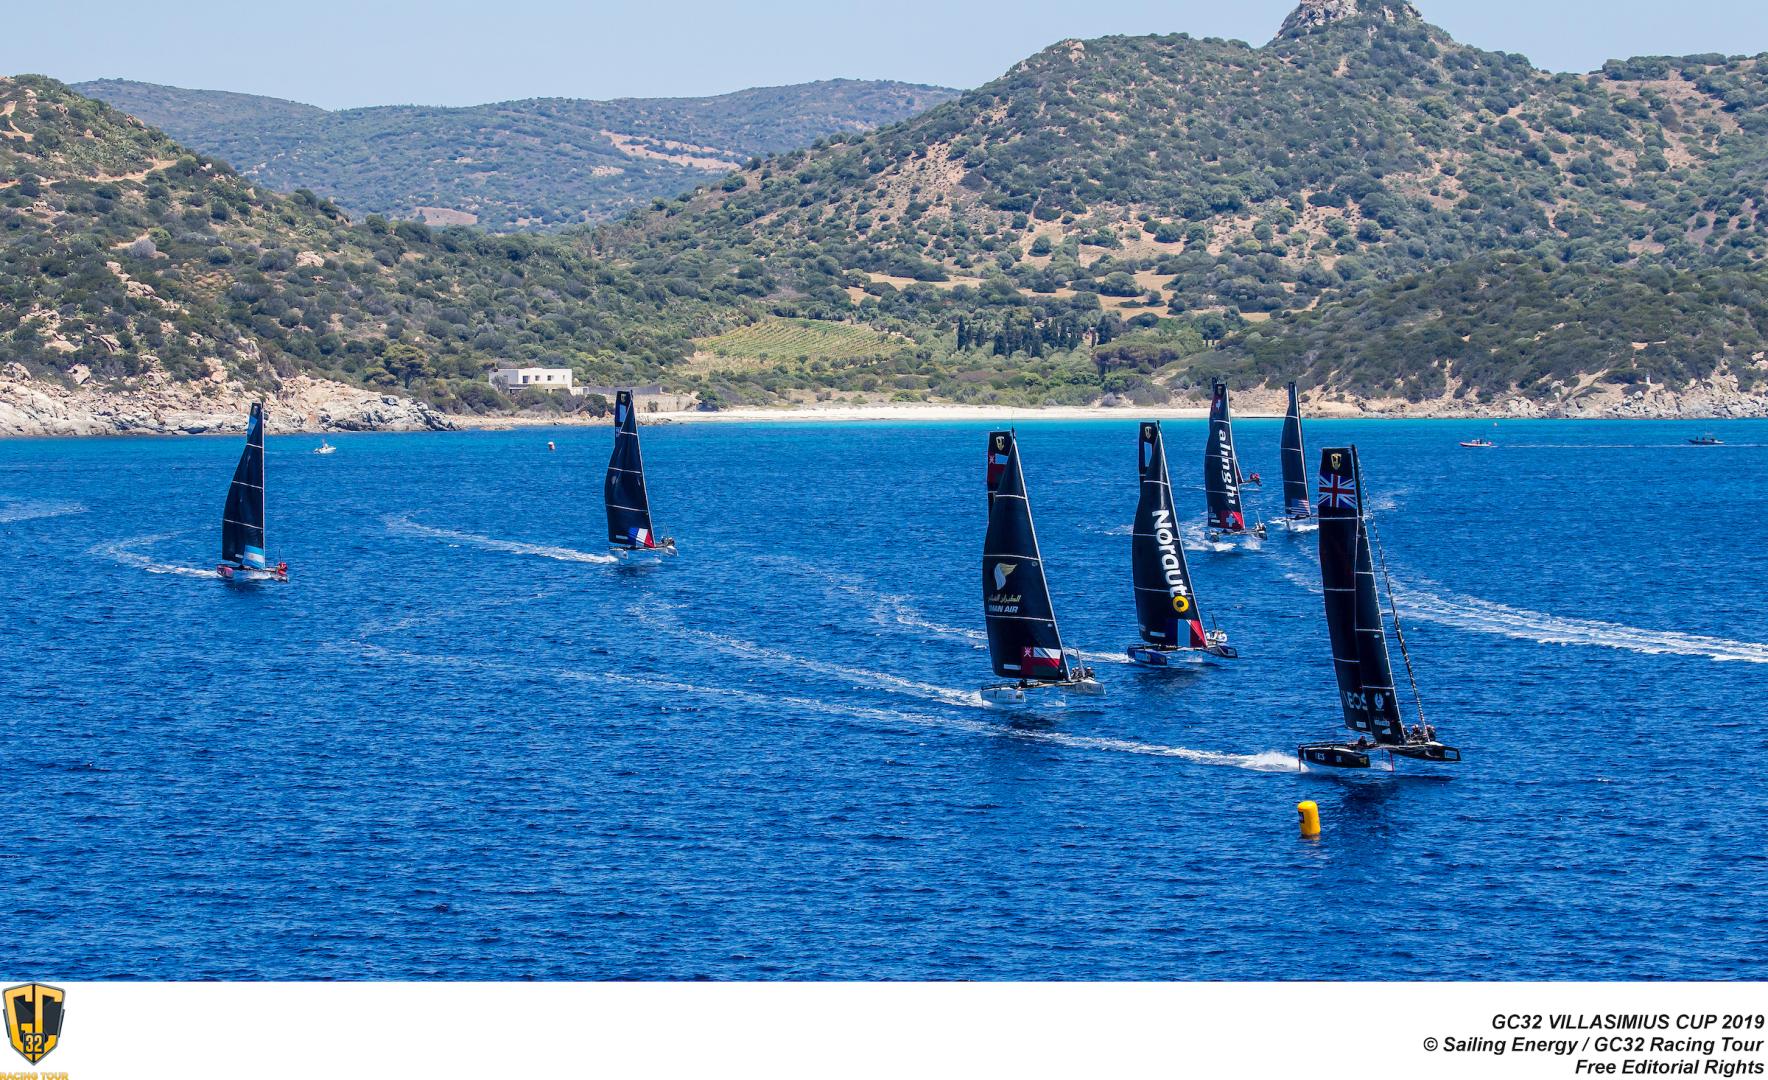 In mid-September the GC32s can expect good sea breeze conditions in Villasimius. Photo: Sailing Energy / GC32 Racing Tour.